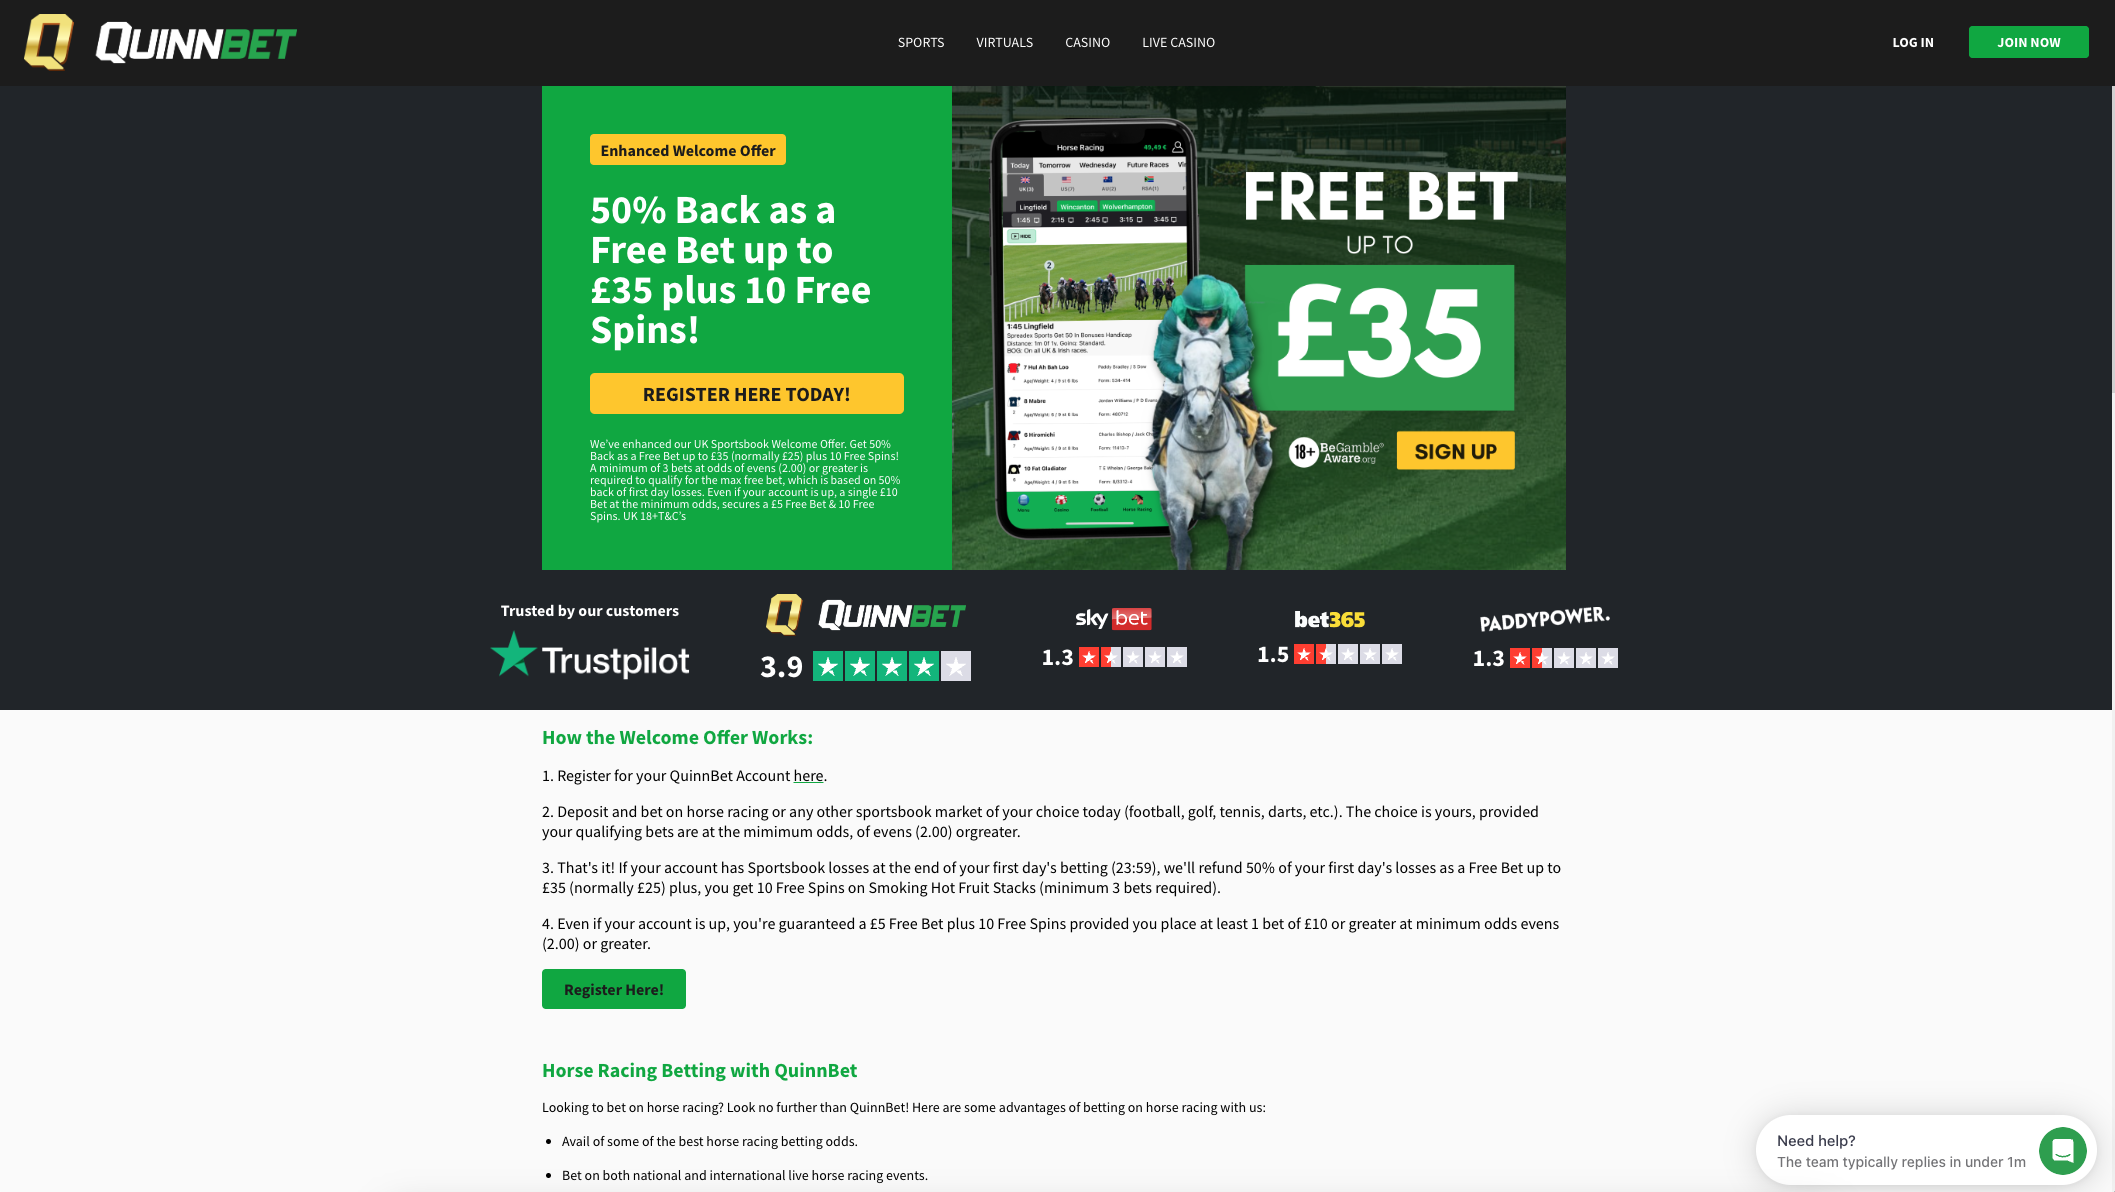 An image of the Quinnbet Horse Racing Free Bet Offer.